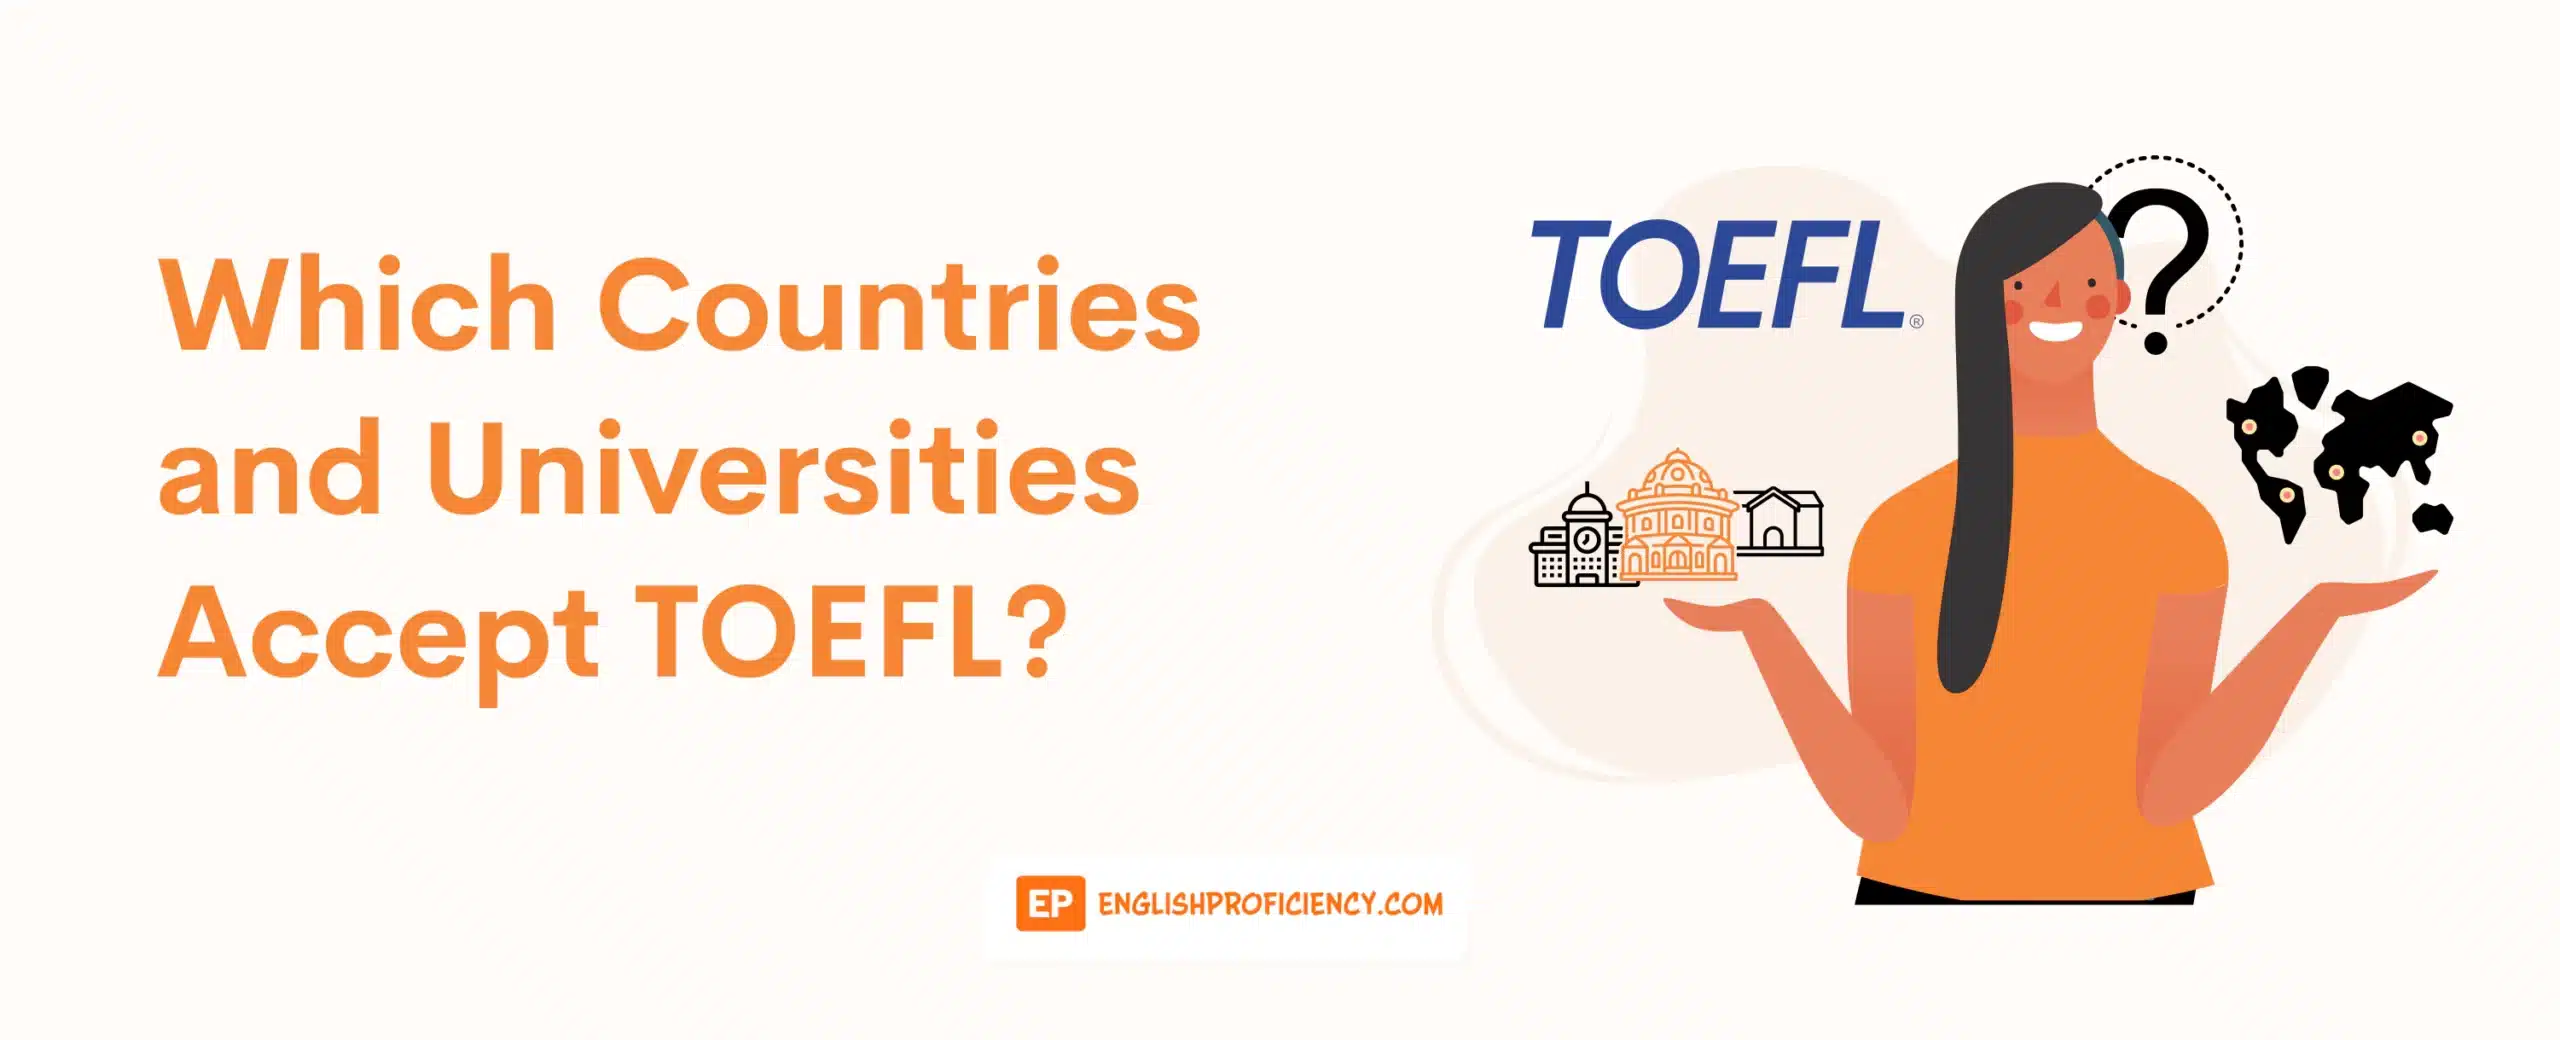 Which Countries and Universities Accept TOEFL